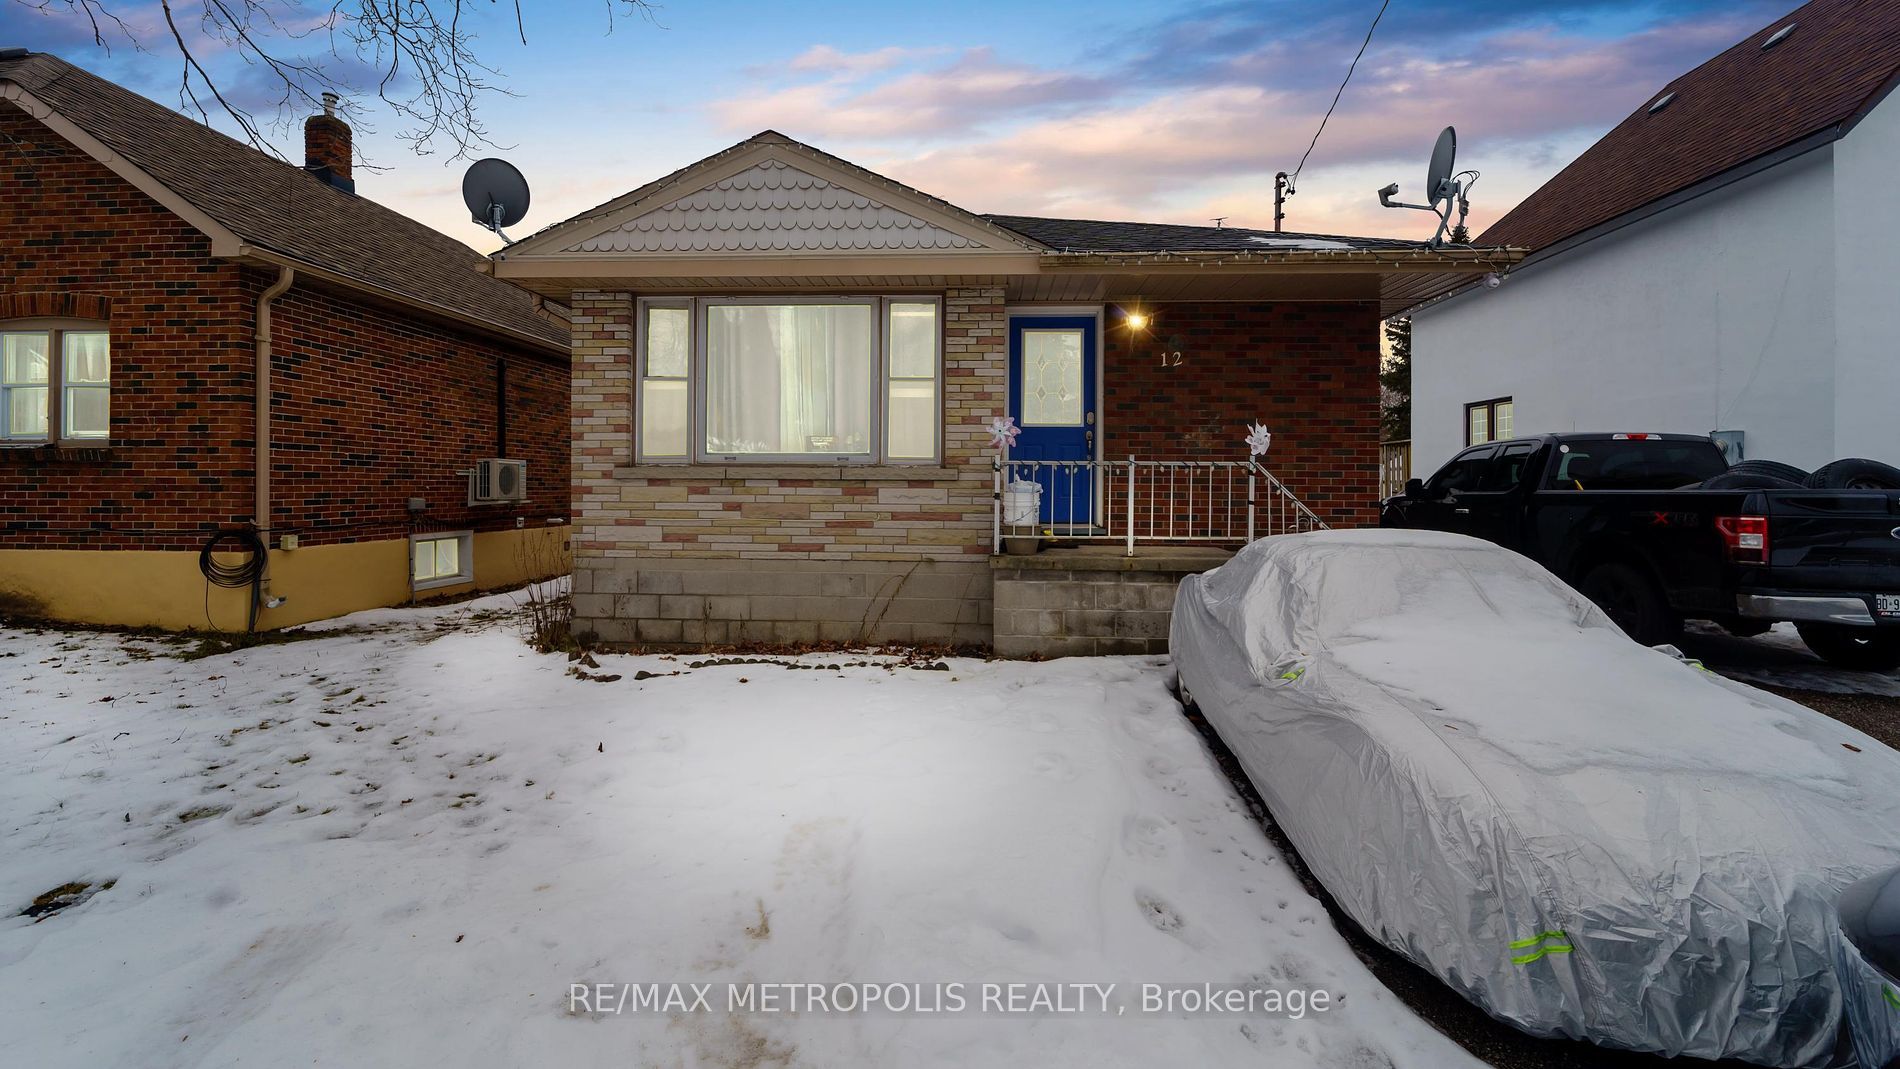 New property listed in Queen's Park, Barrie